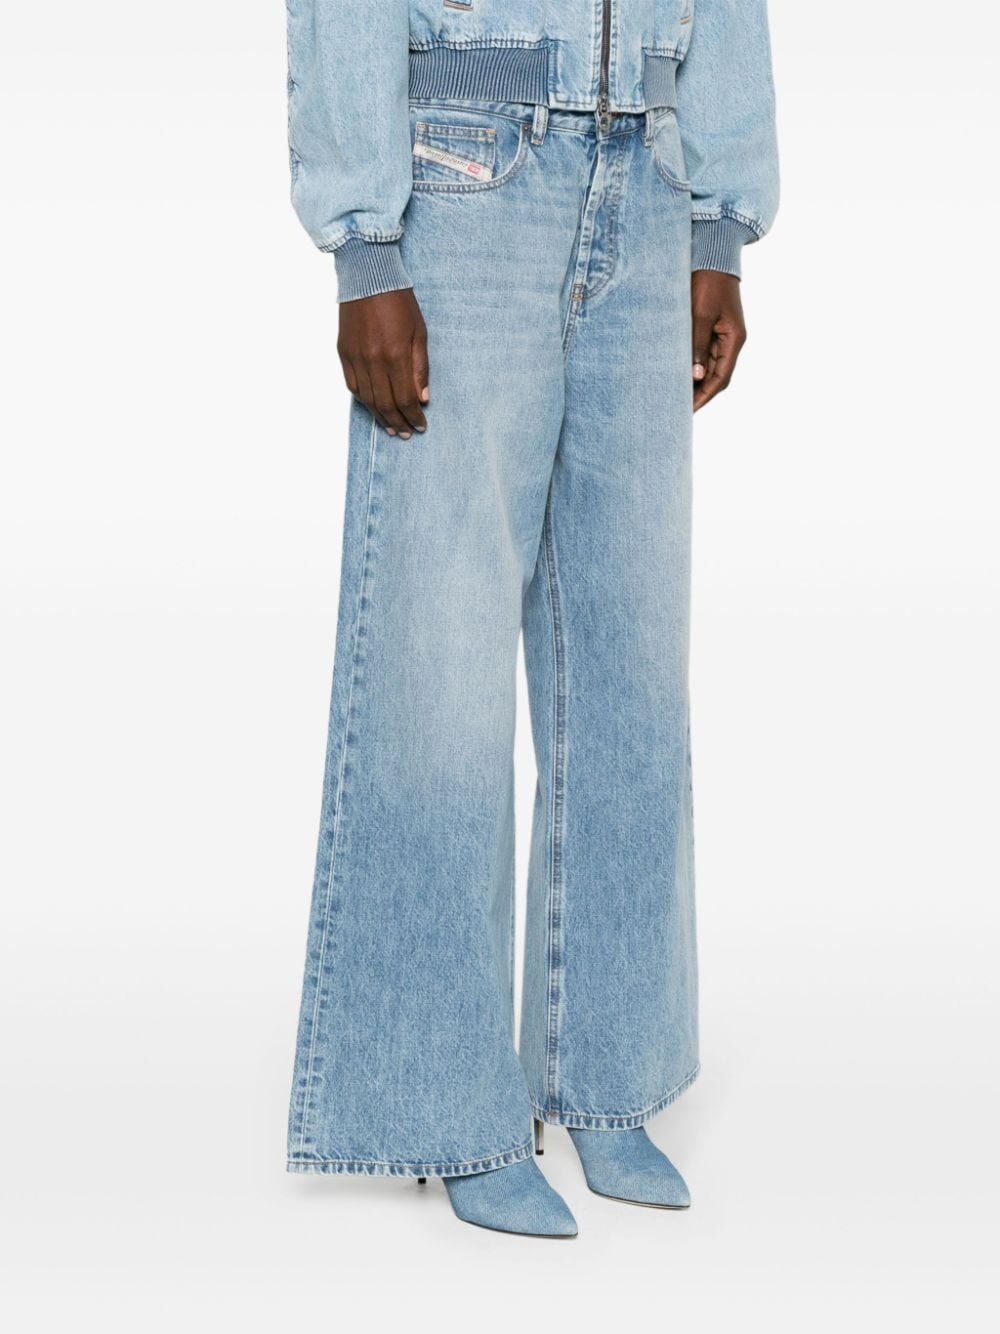 Straight jeans 1996 d-sire 09i29 - 3